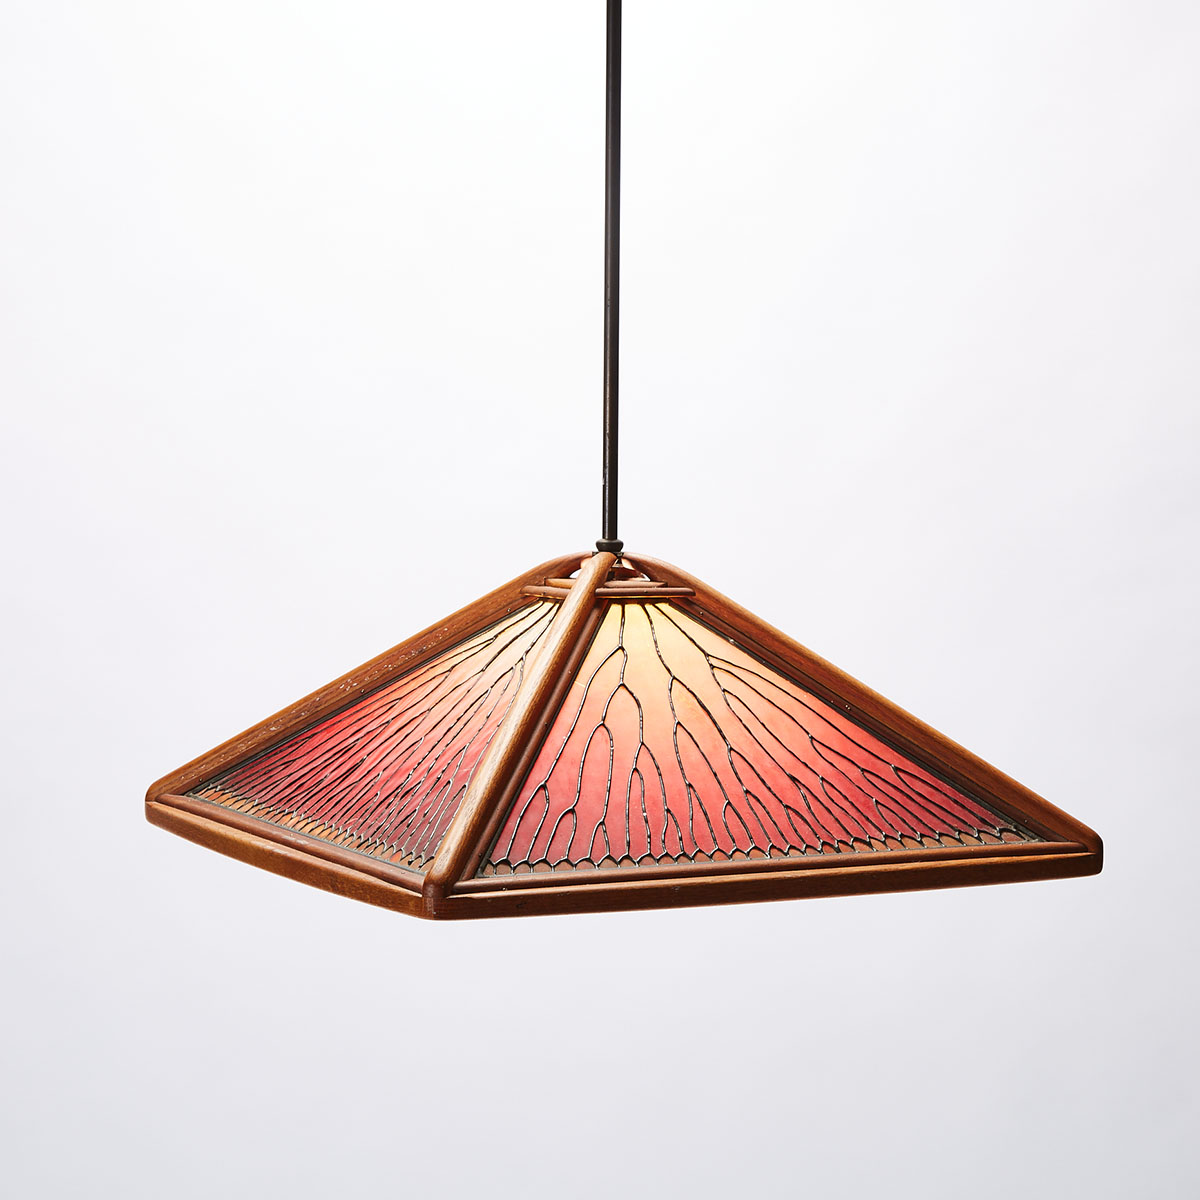 Leaded Glass Hanging Fixture, mid 20th century